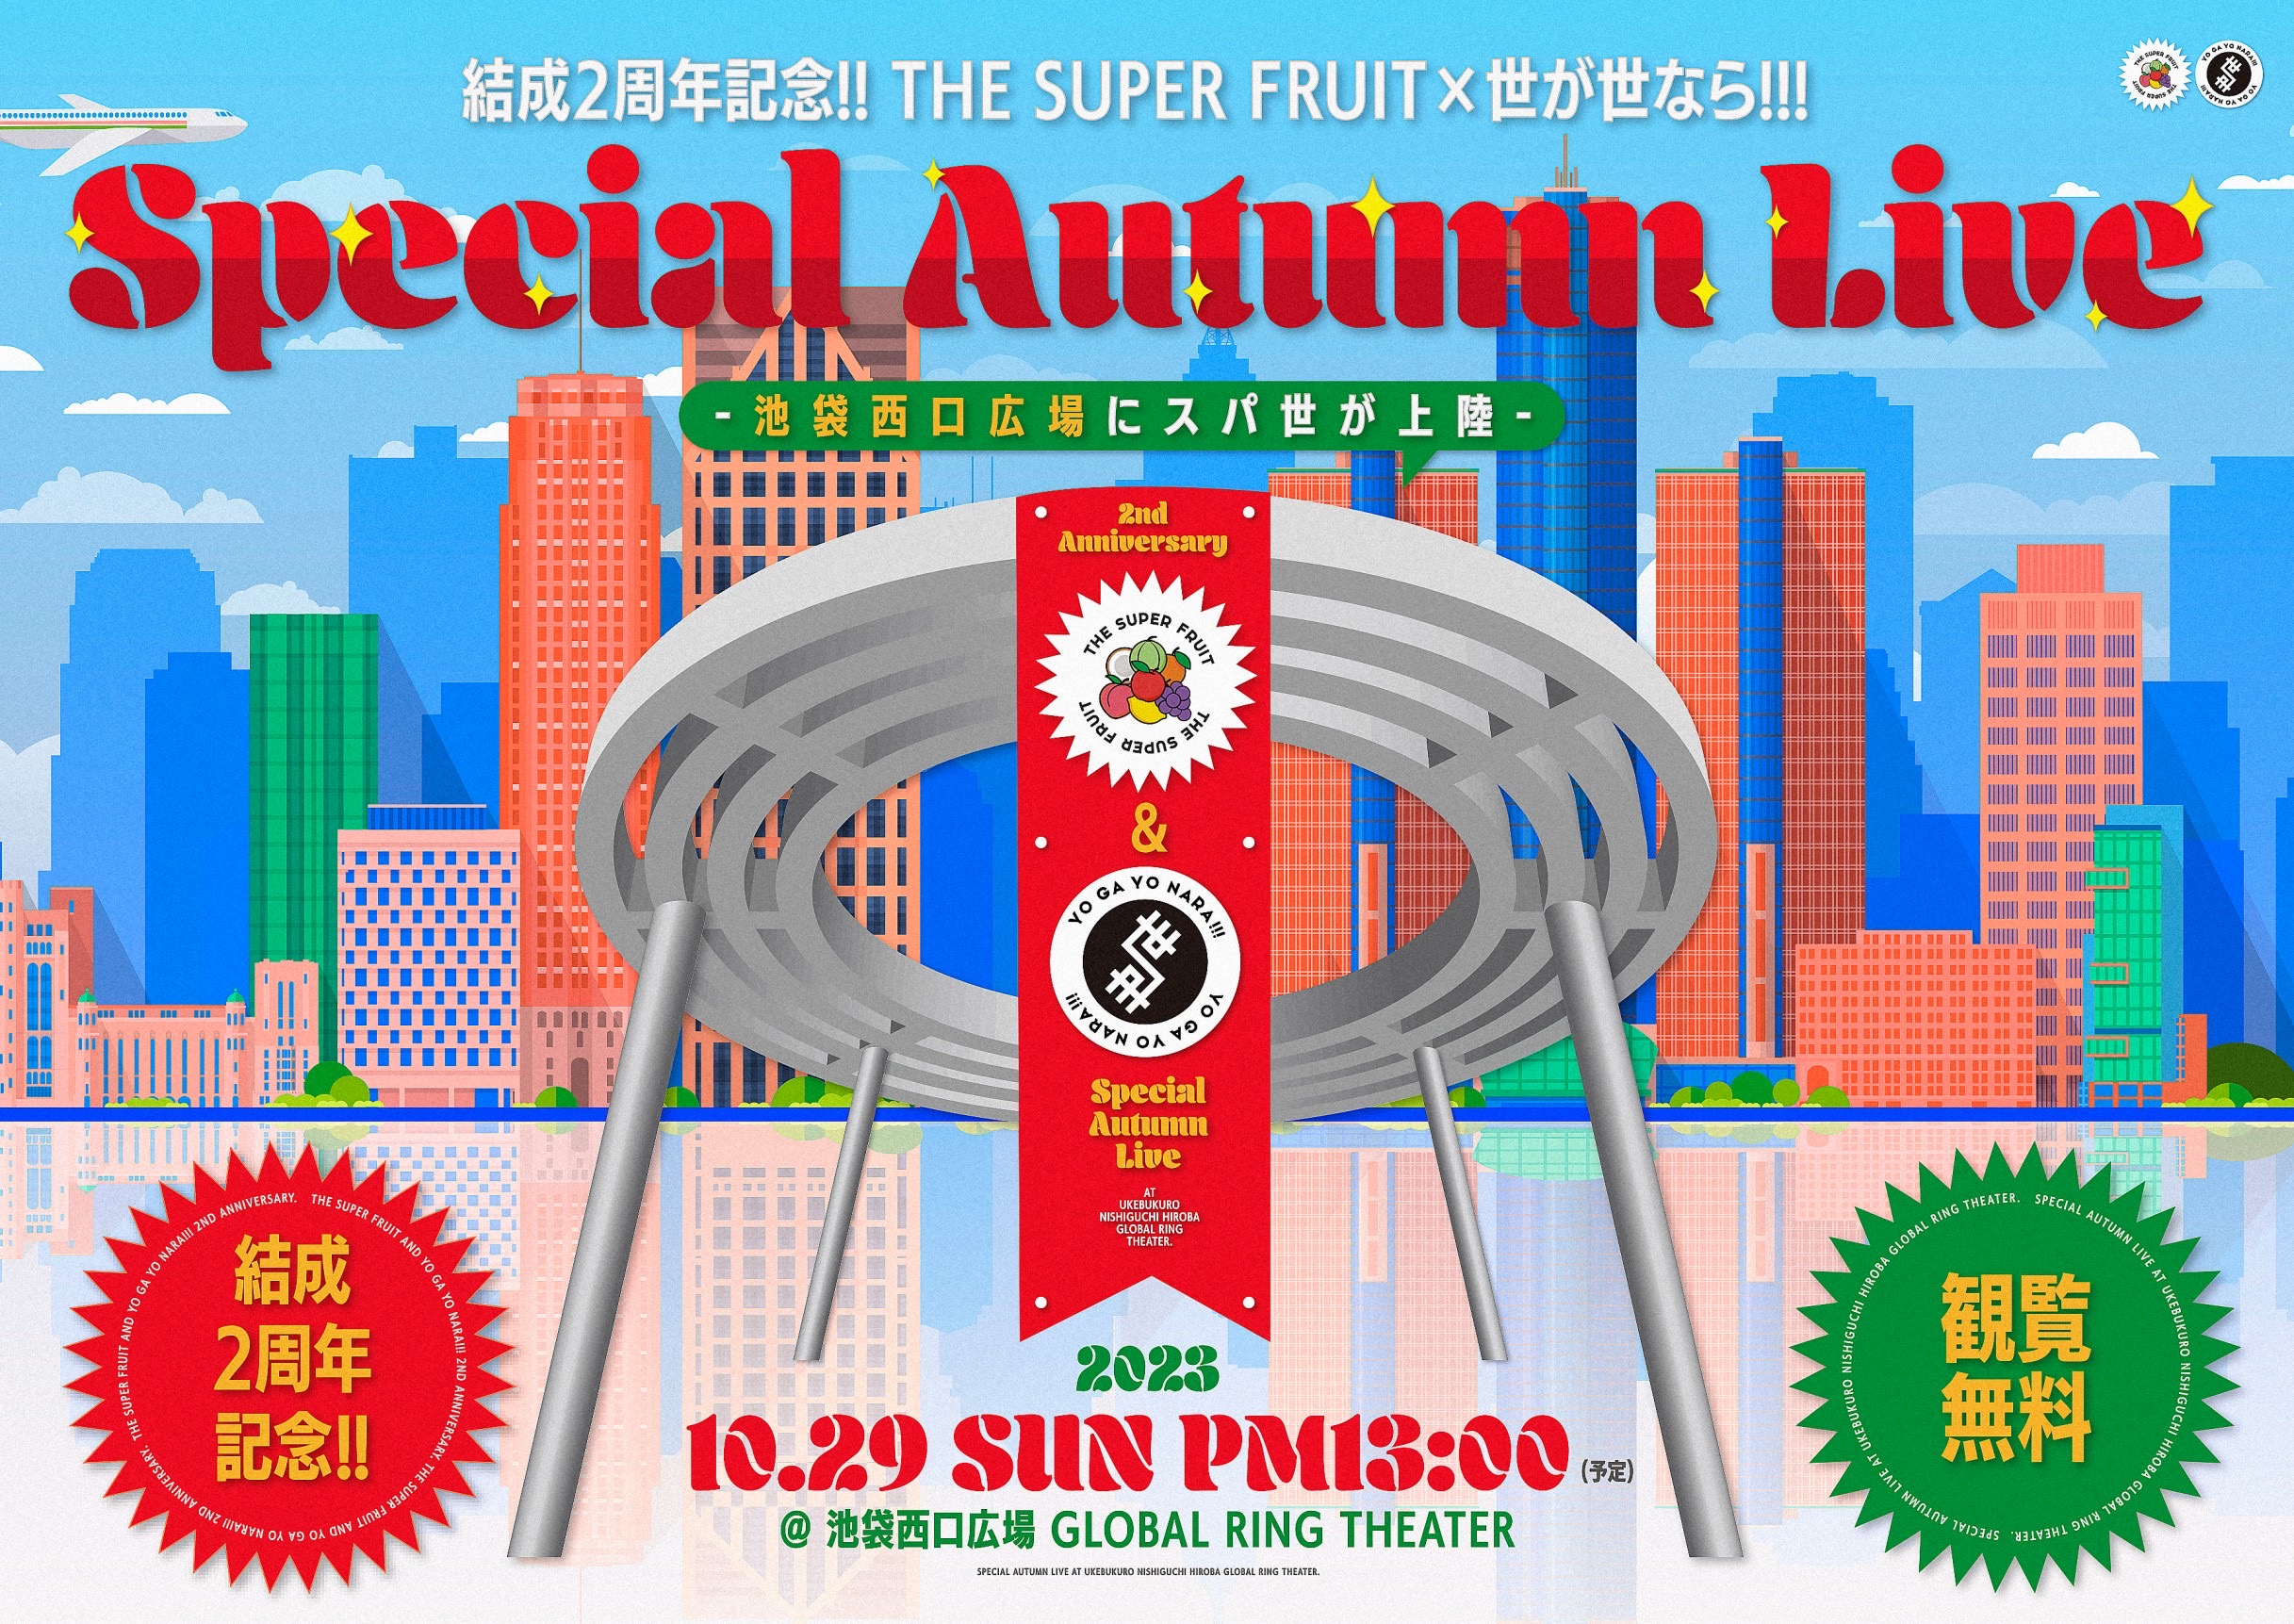 【NEWS】10月29日(日)「結成2周年記念!!THE SUPER FRUIT×世が世なら!!! Special Autumn Live  – 池袋西口広場にスパ世が上陸 -」＠池袋西口公園野外劇場グローバルリング シアター(東京）にて開催決定！！